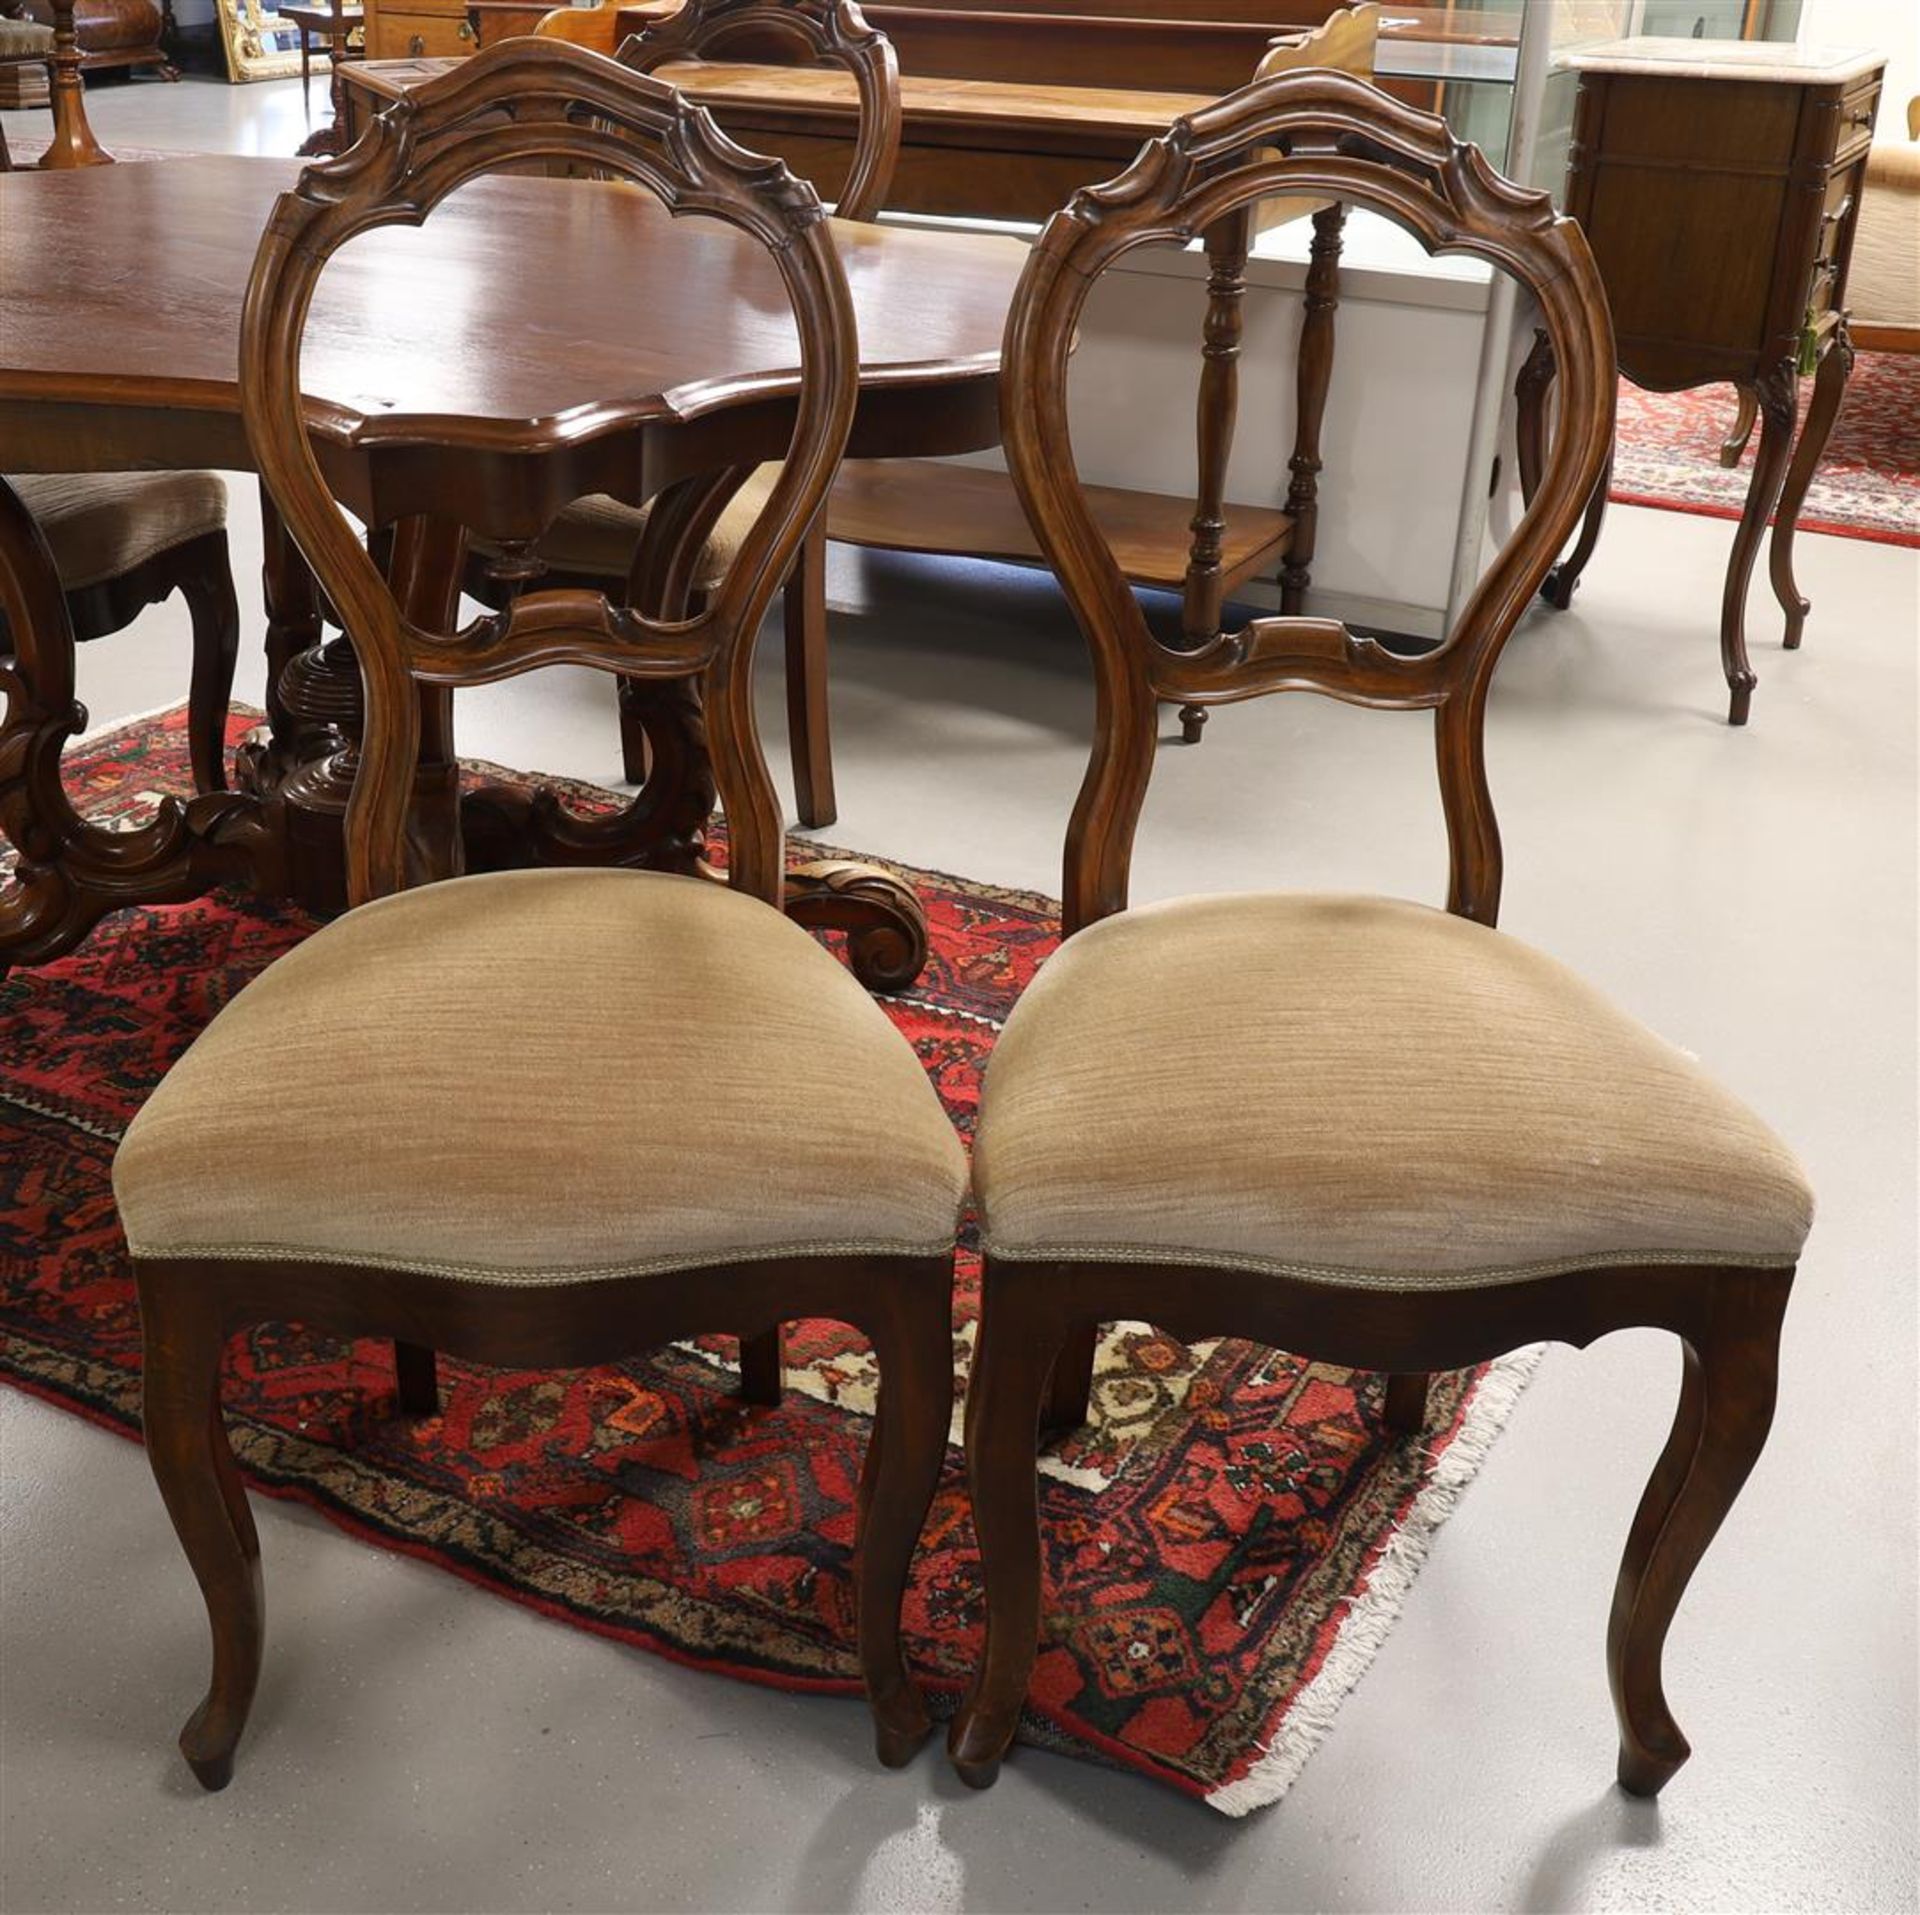 An oval spider leg table with chairs, Holland, Willem III, 19th century. - Image 3 of 4